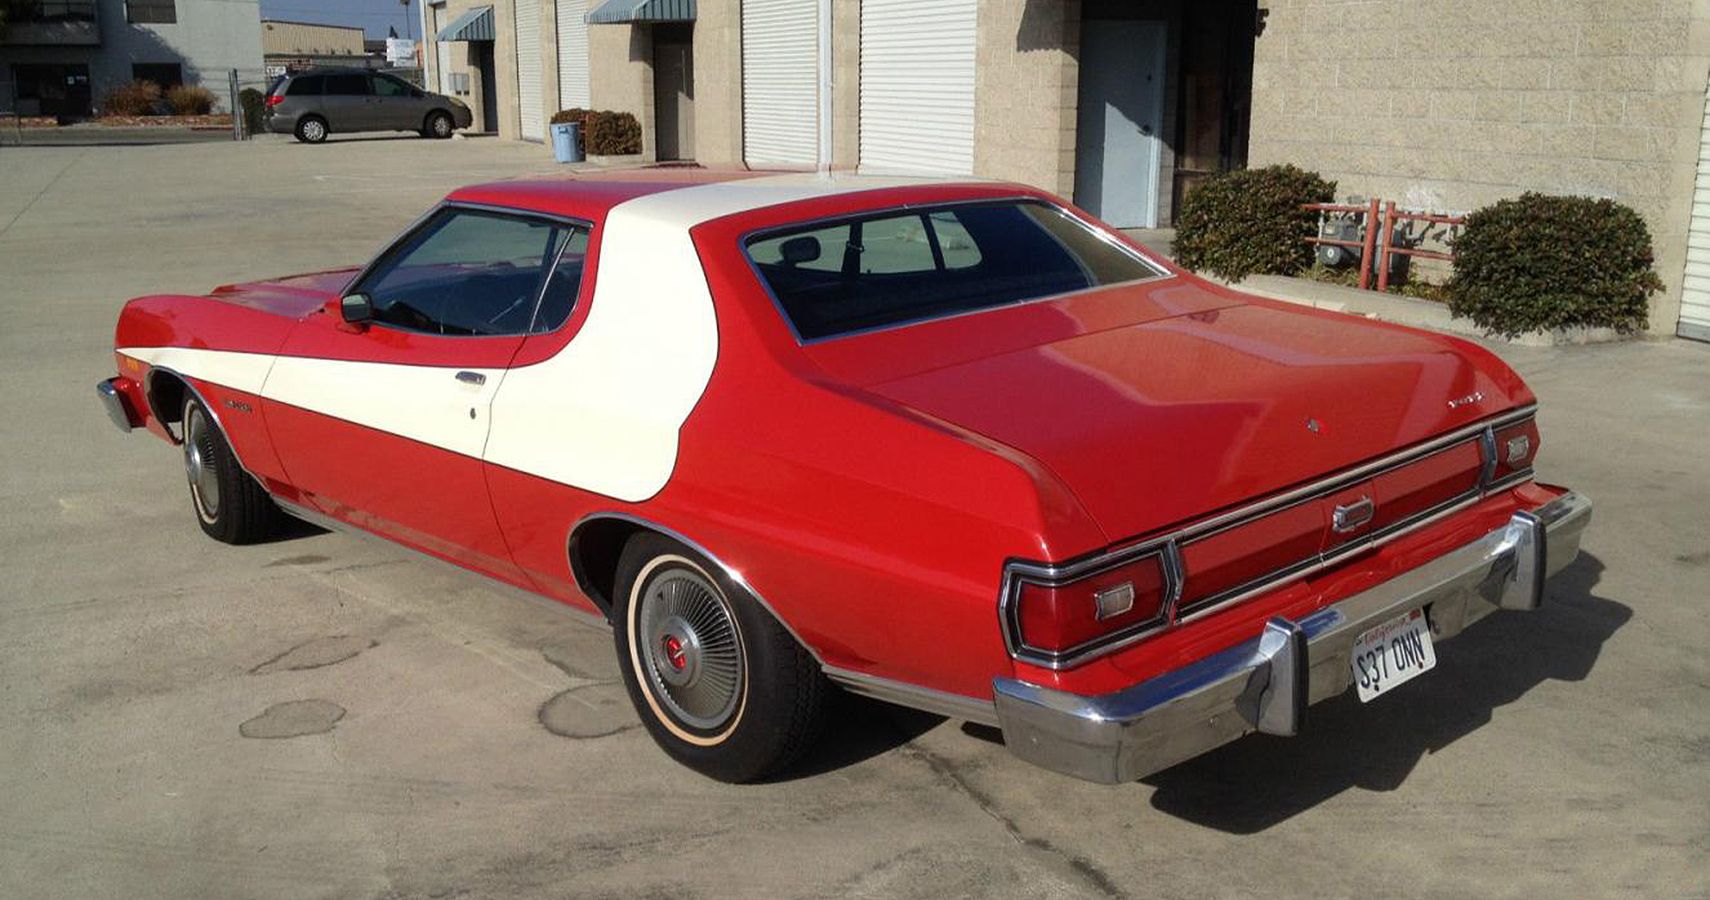 Starsky & Hutch’s Gran Torino Was So Well-Received By The Audience, The Show’s Producers, ABC Studios, And Ford Motors Began To Get Inquiries About The Car